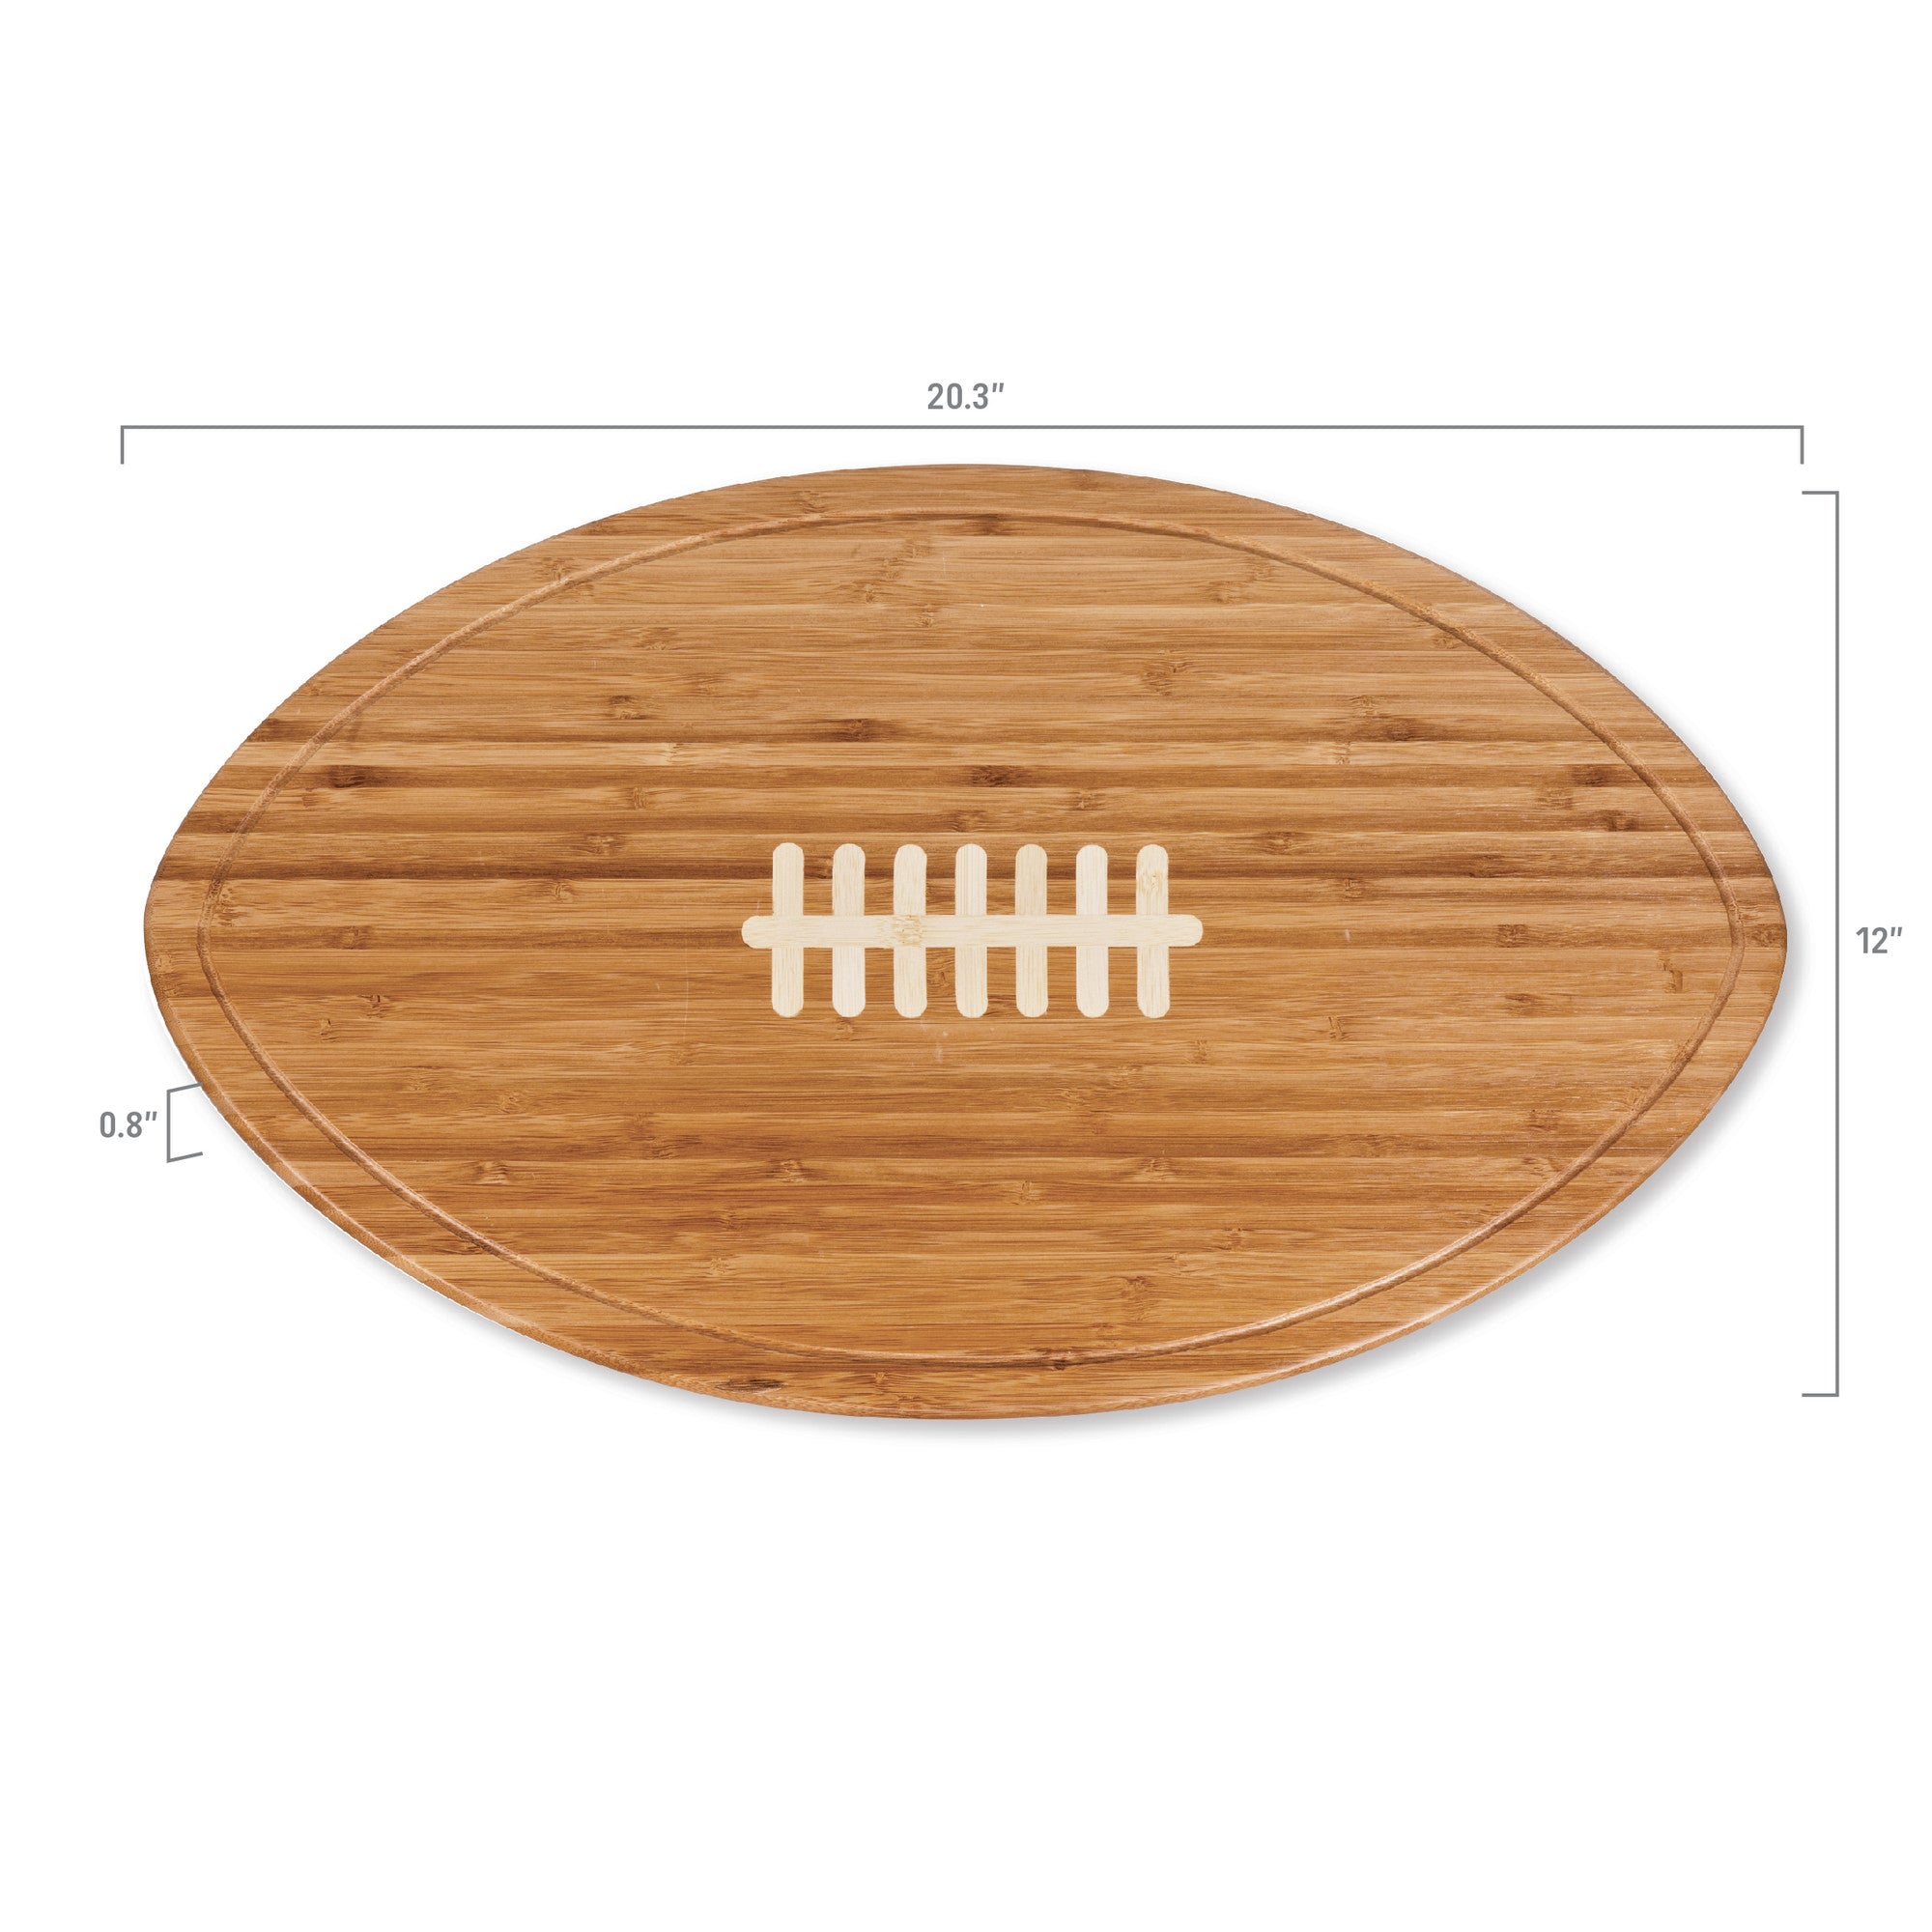 Pittsburgh Panthers - Kickoff Football Cutting Board & Serving Tray